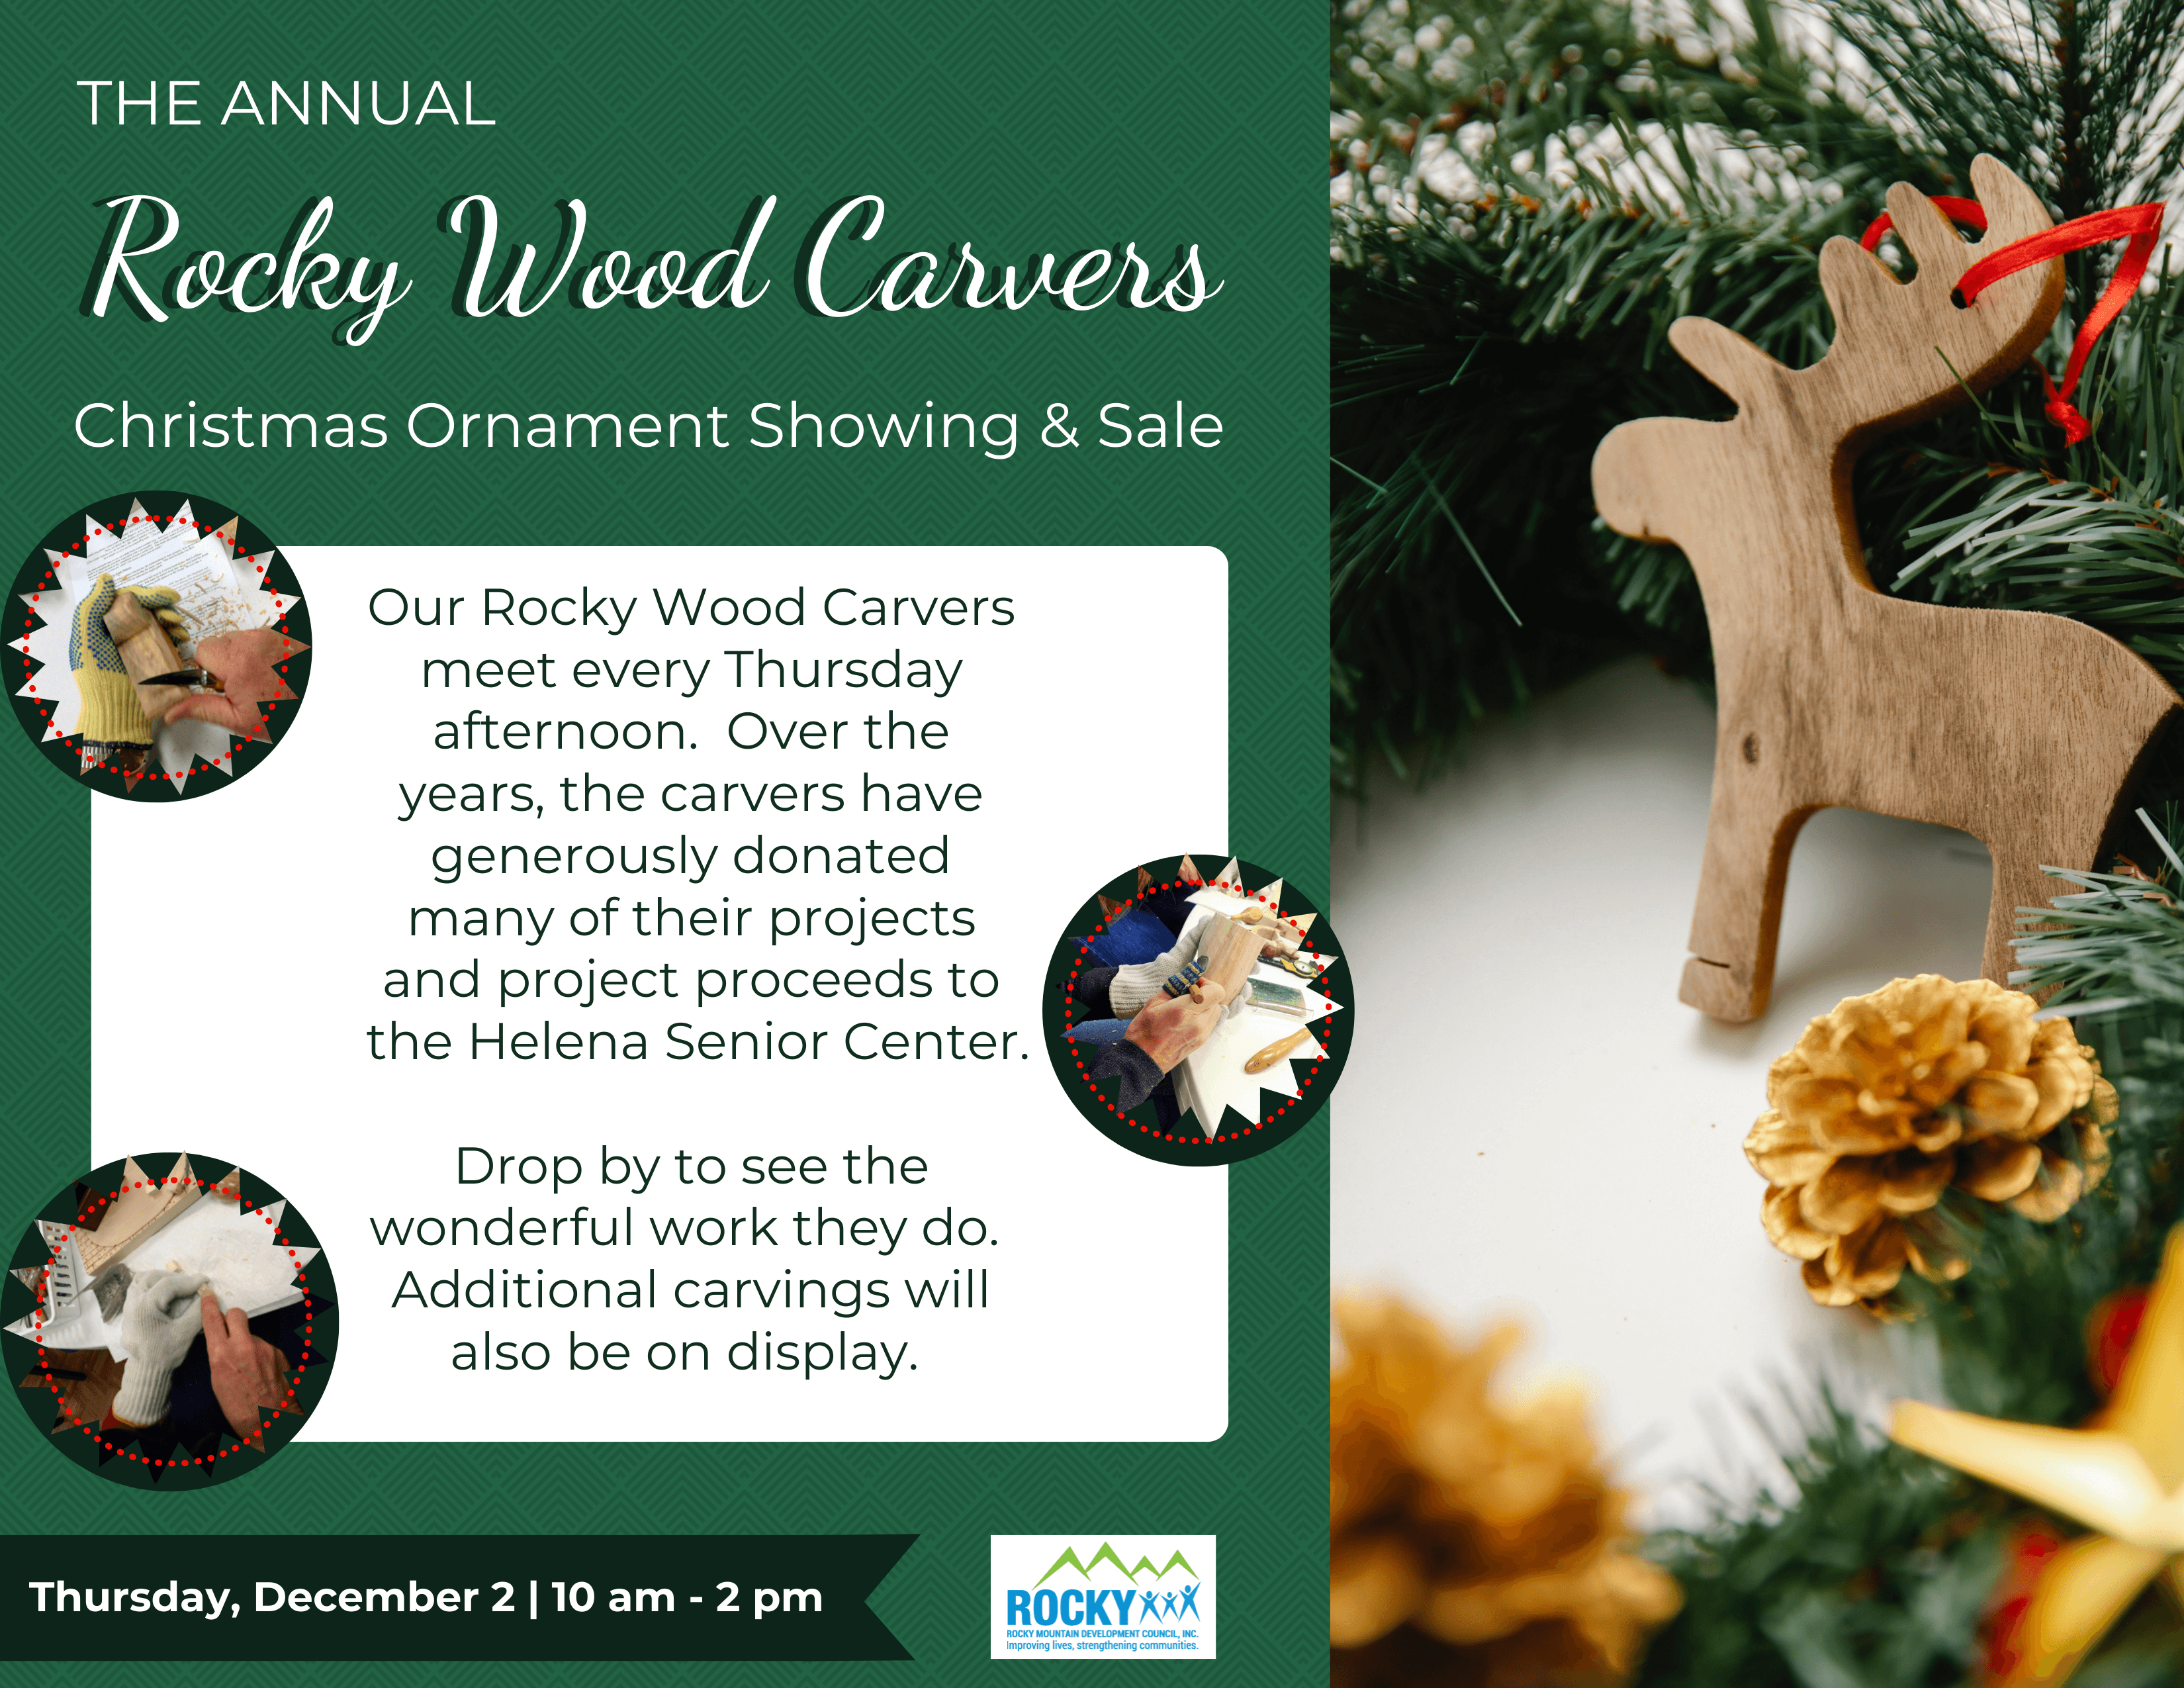 Thursday, December 2 is the annual Rocky Wood Carvers Christmas Ornament Showing and Sale